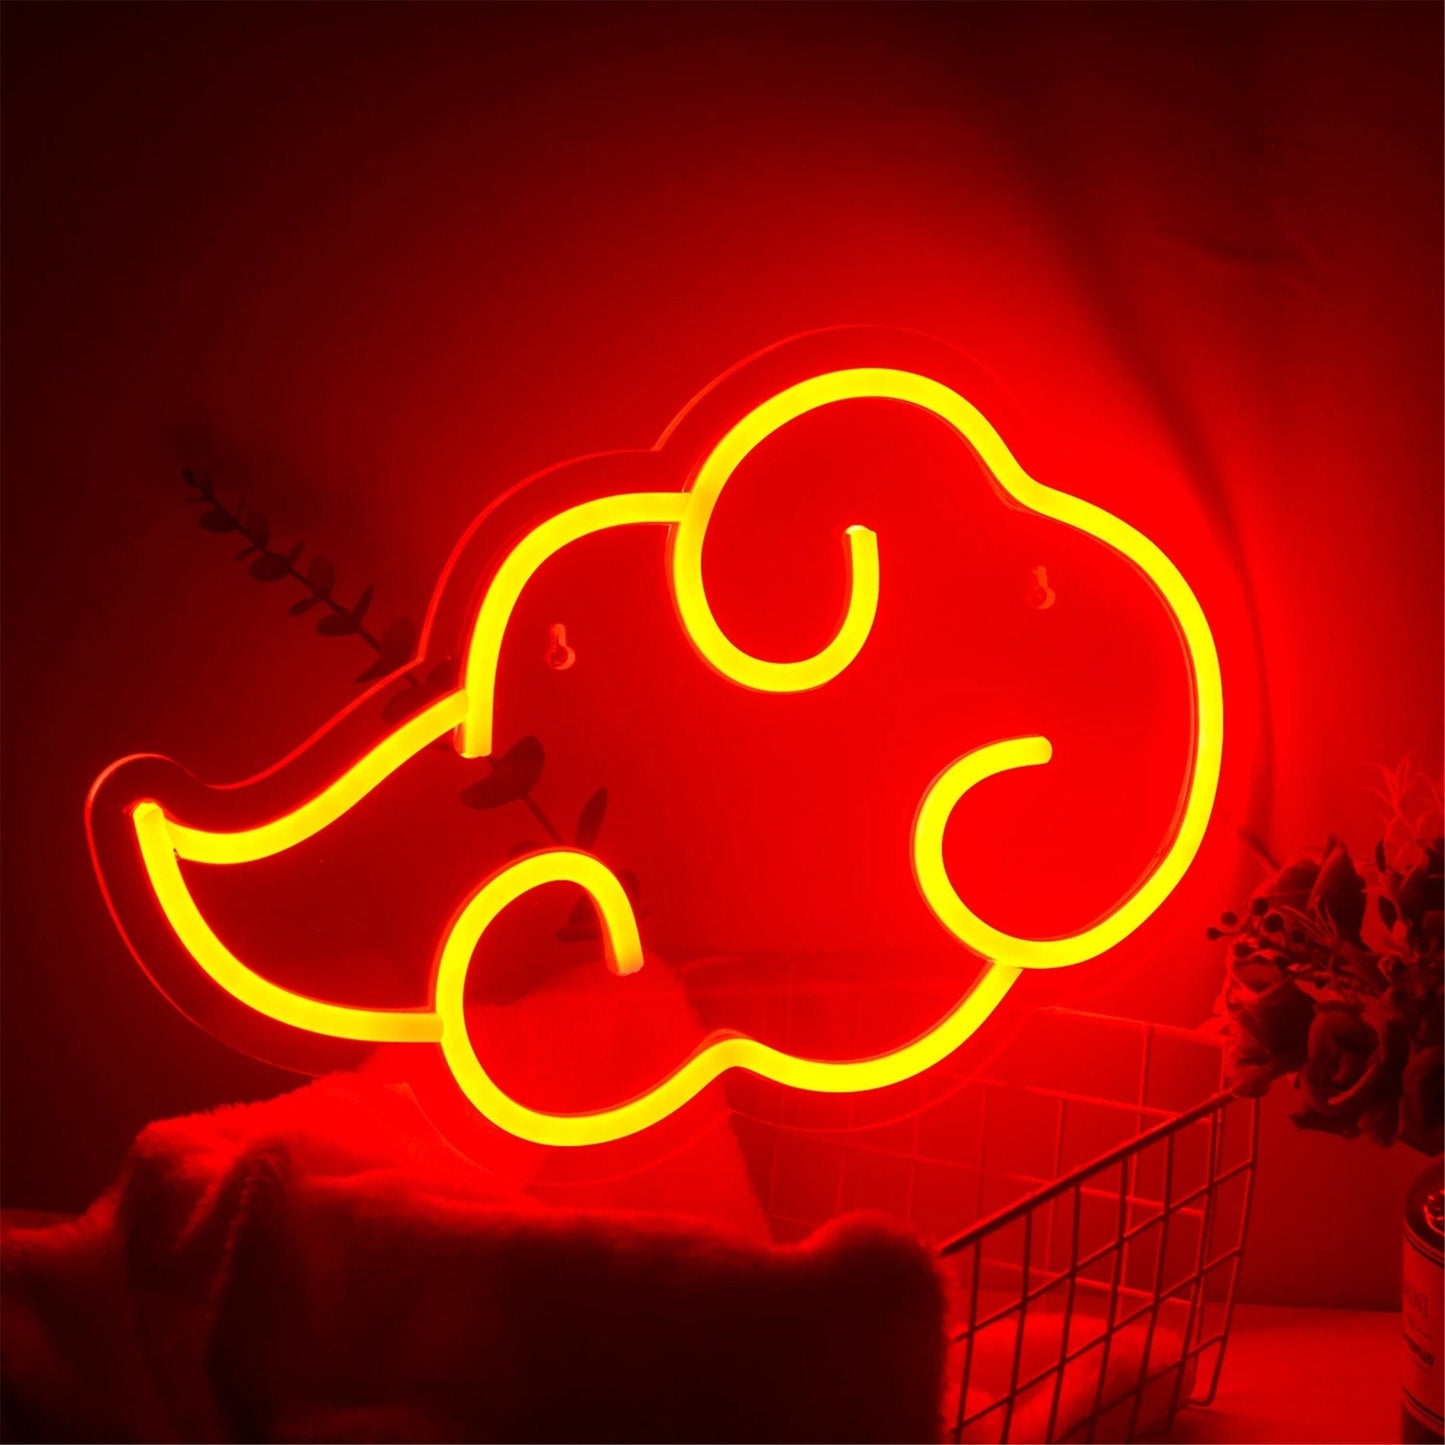 Anime Cloud Neon Sign Dimmable Cool LED Neon Lights Signs USB Powered for Bedroom Kids Game Room Party Wall Decor